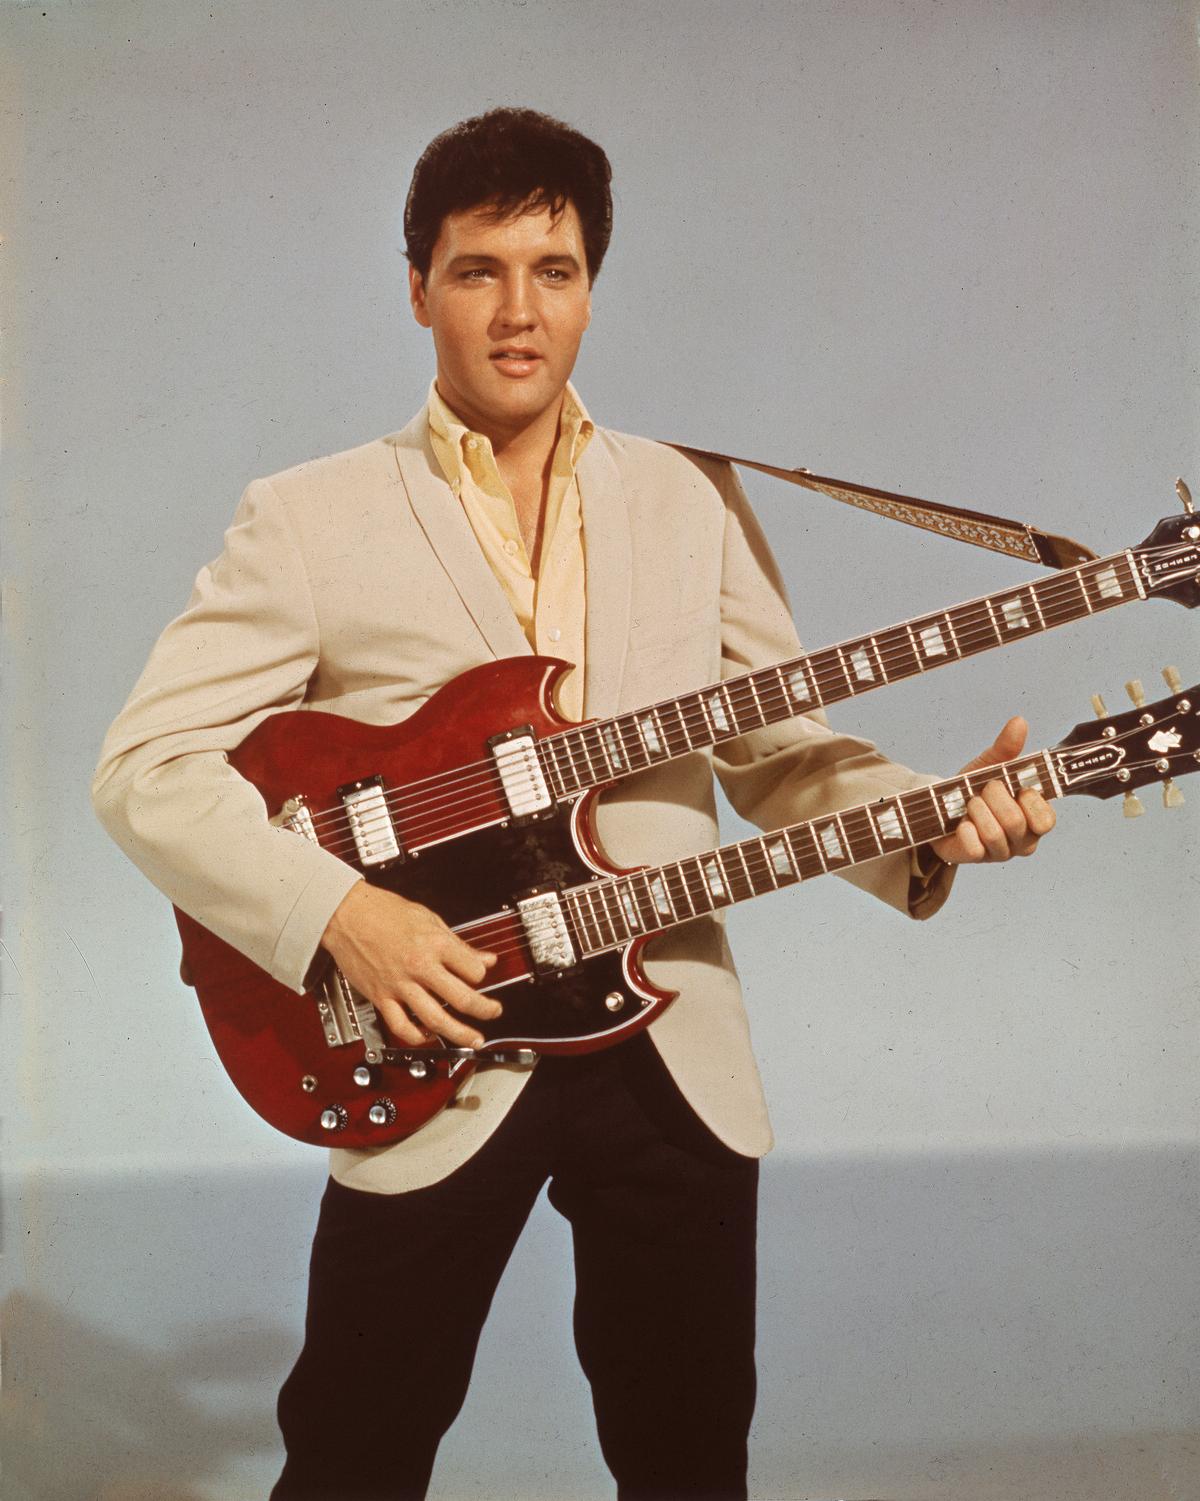 Elvis Presley holding a 1965 Gibson EBS-1250 Double Bass while filming "Spinout," circa 1966 (©<a href="https://www.gettyimages.com/detail/news-photo/portrait-of-american-singer-and-actor-elvis-presley-holding-news-photo/53203711?adppopup=true">Getty Images</a>)